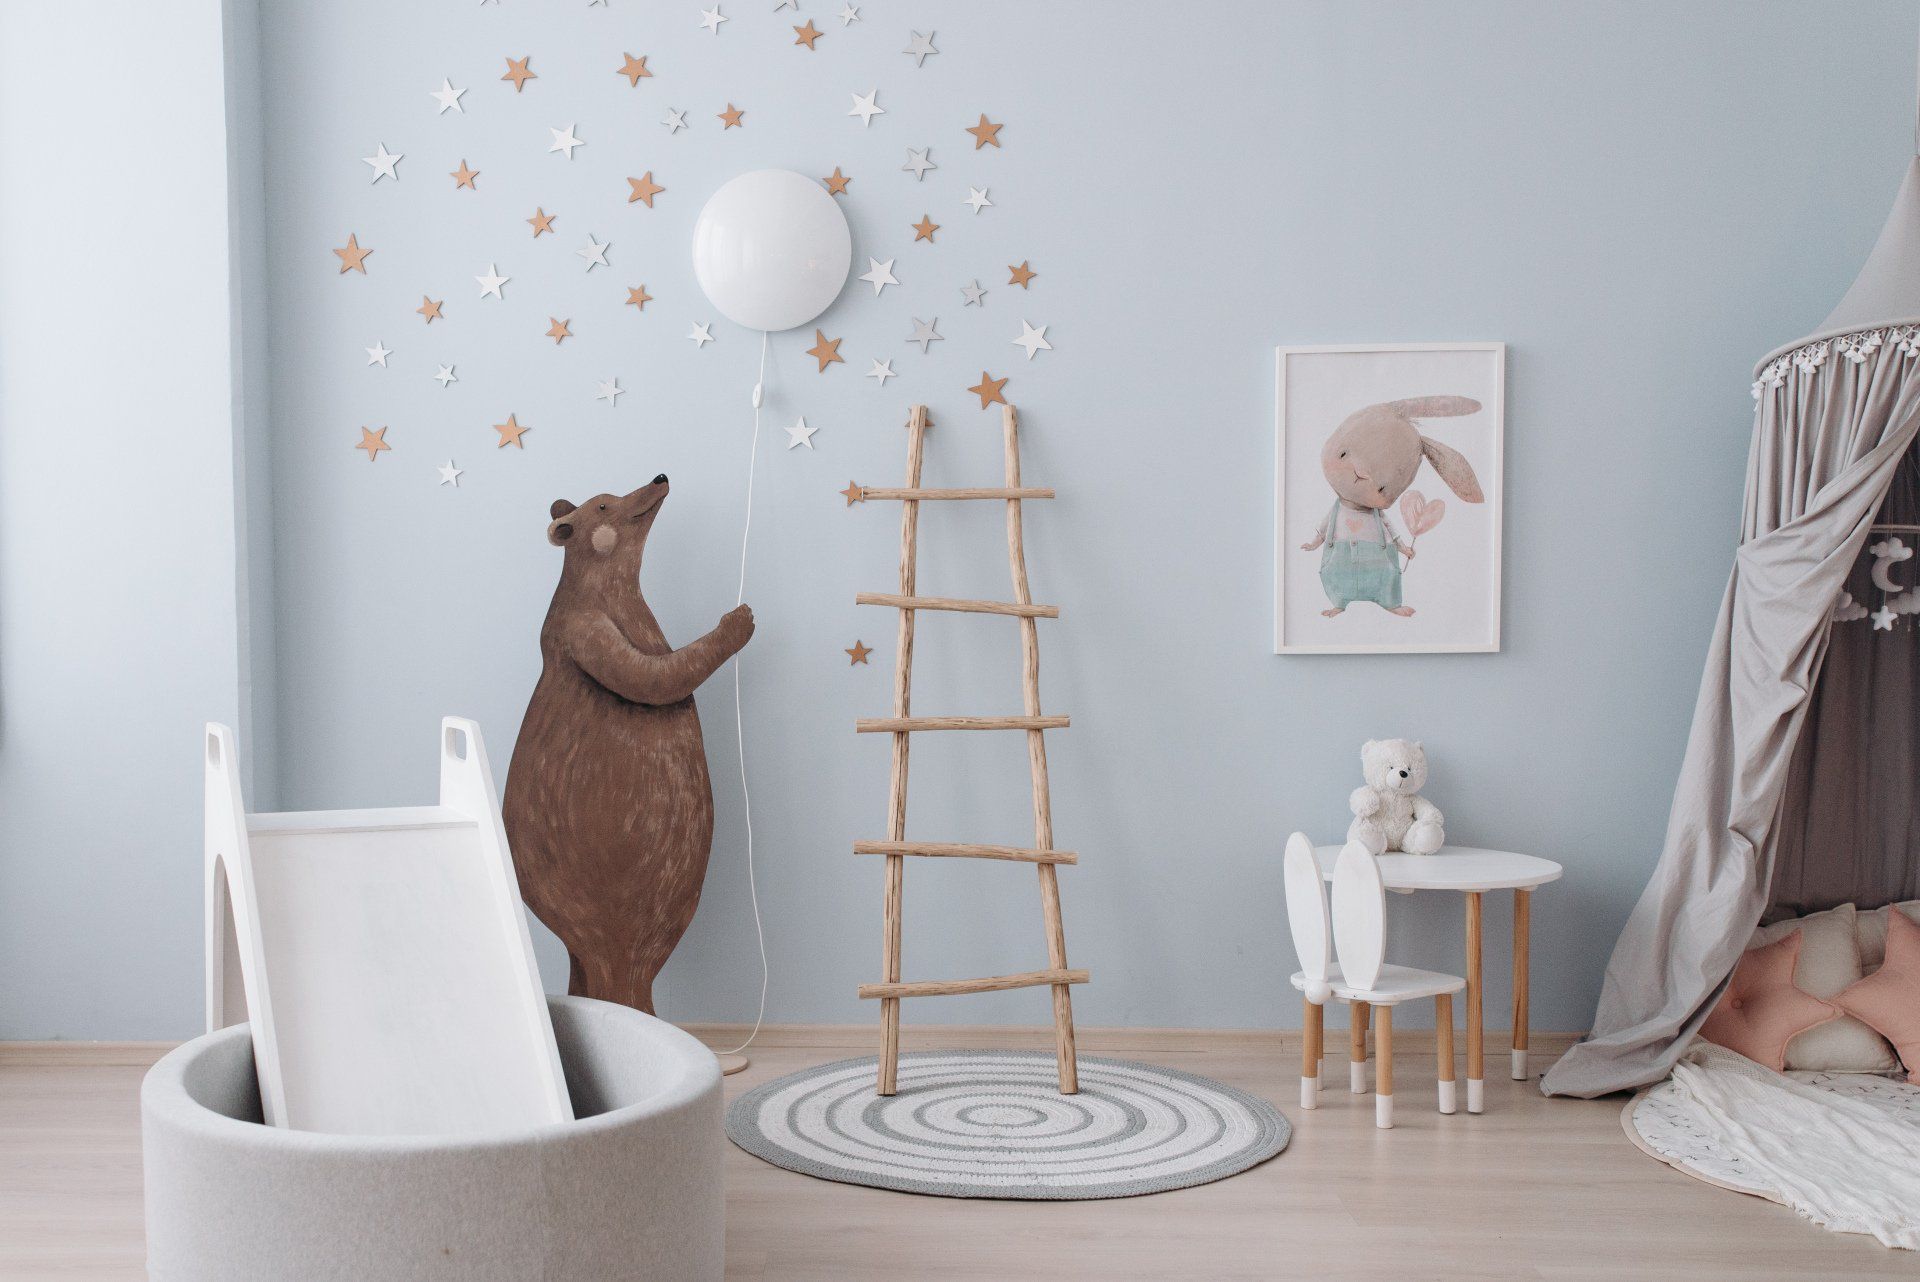 A picture a of a children's nursery room